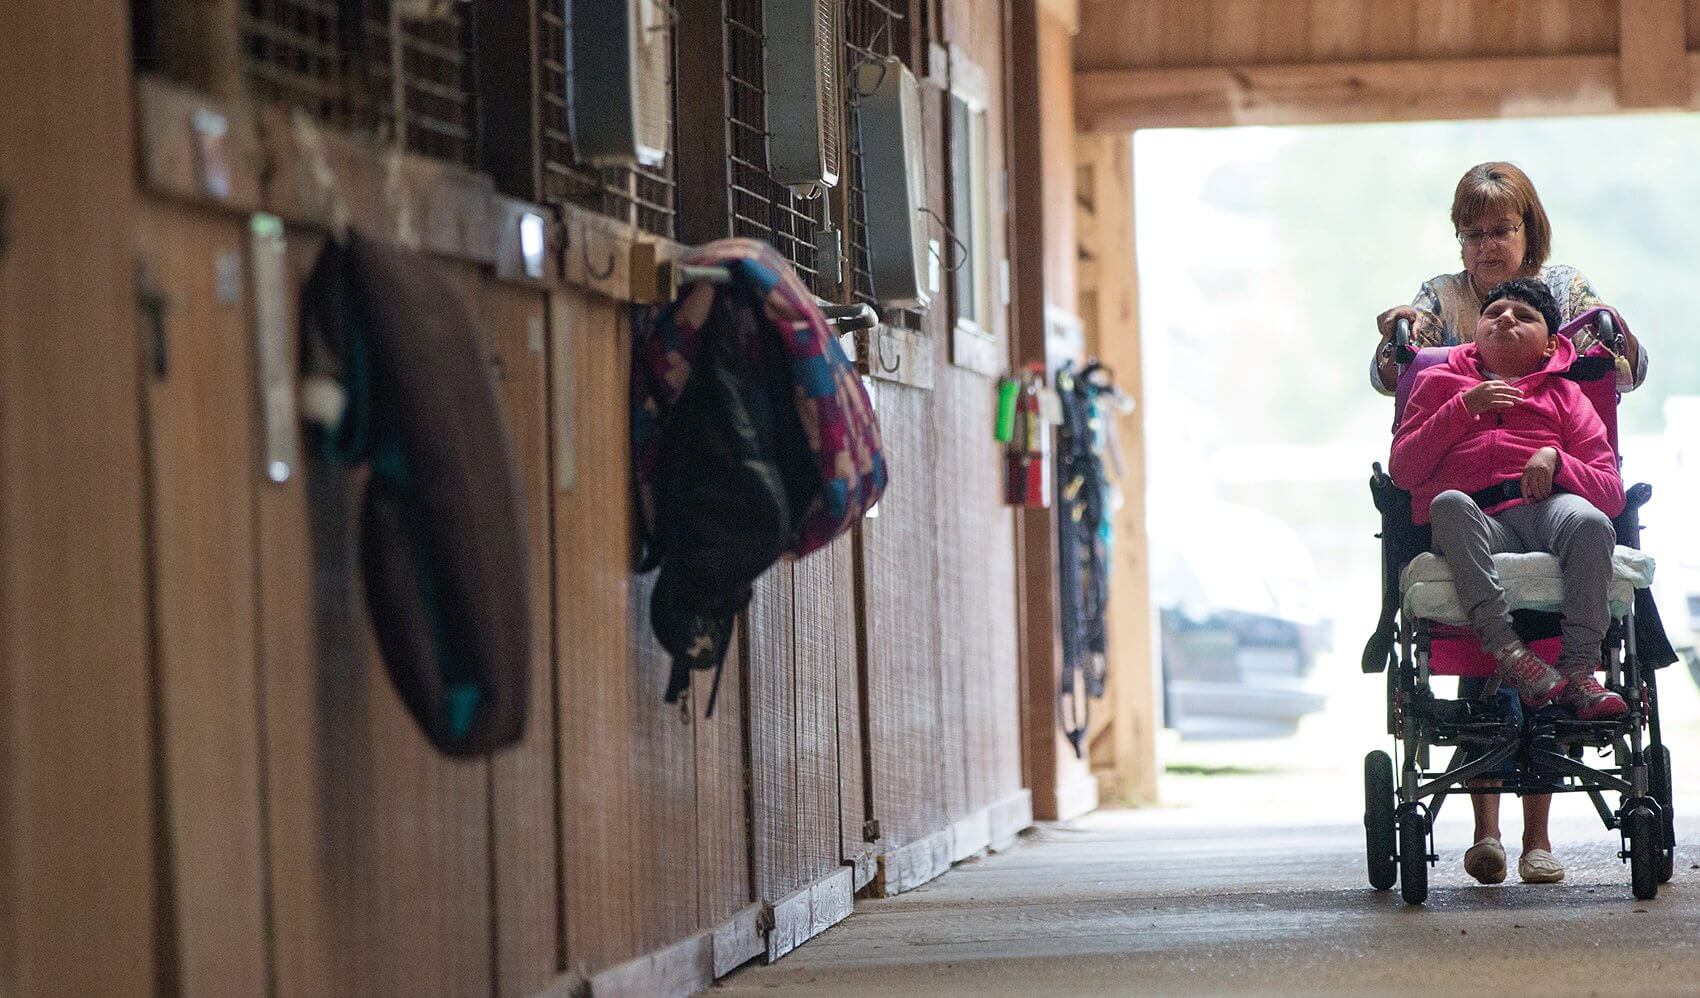 Maria Martinez wheels her daughter, Emelly, through SIRE Therapeutic Horsemanship’s stable in preparation for her horseback ride.